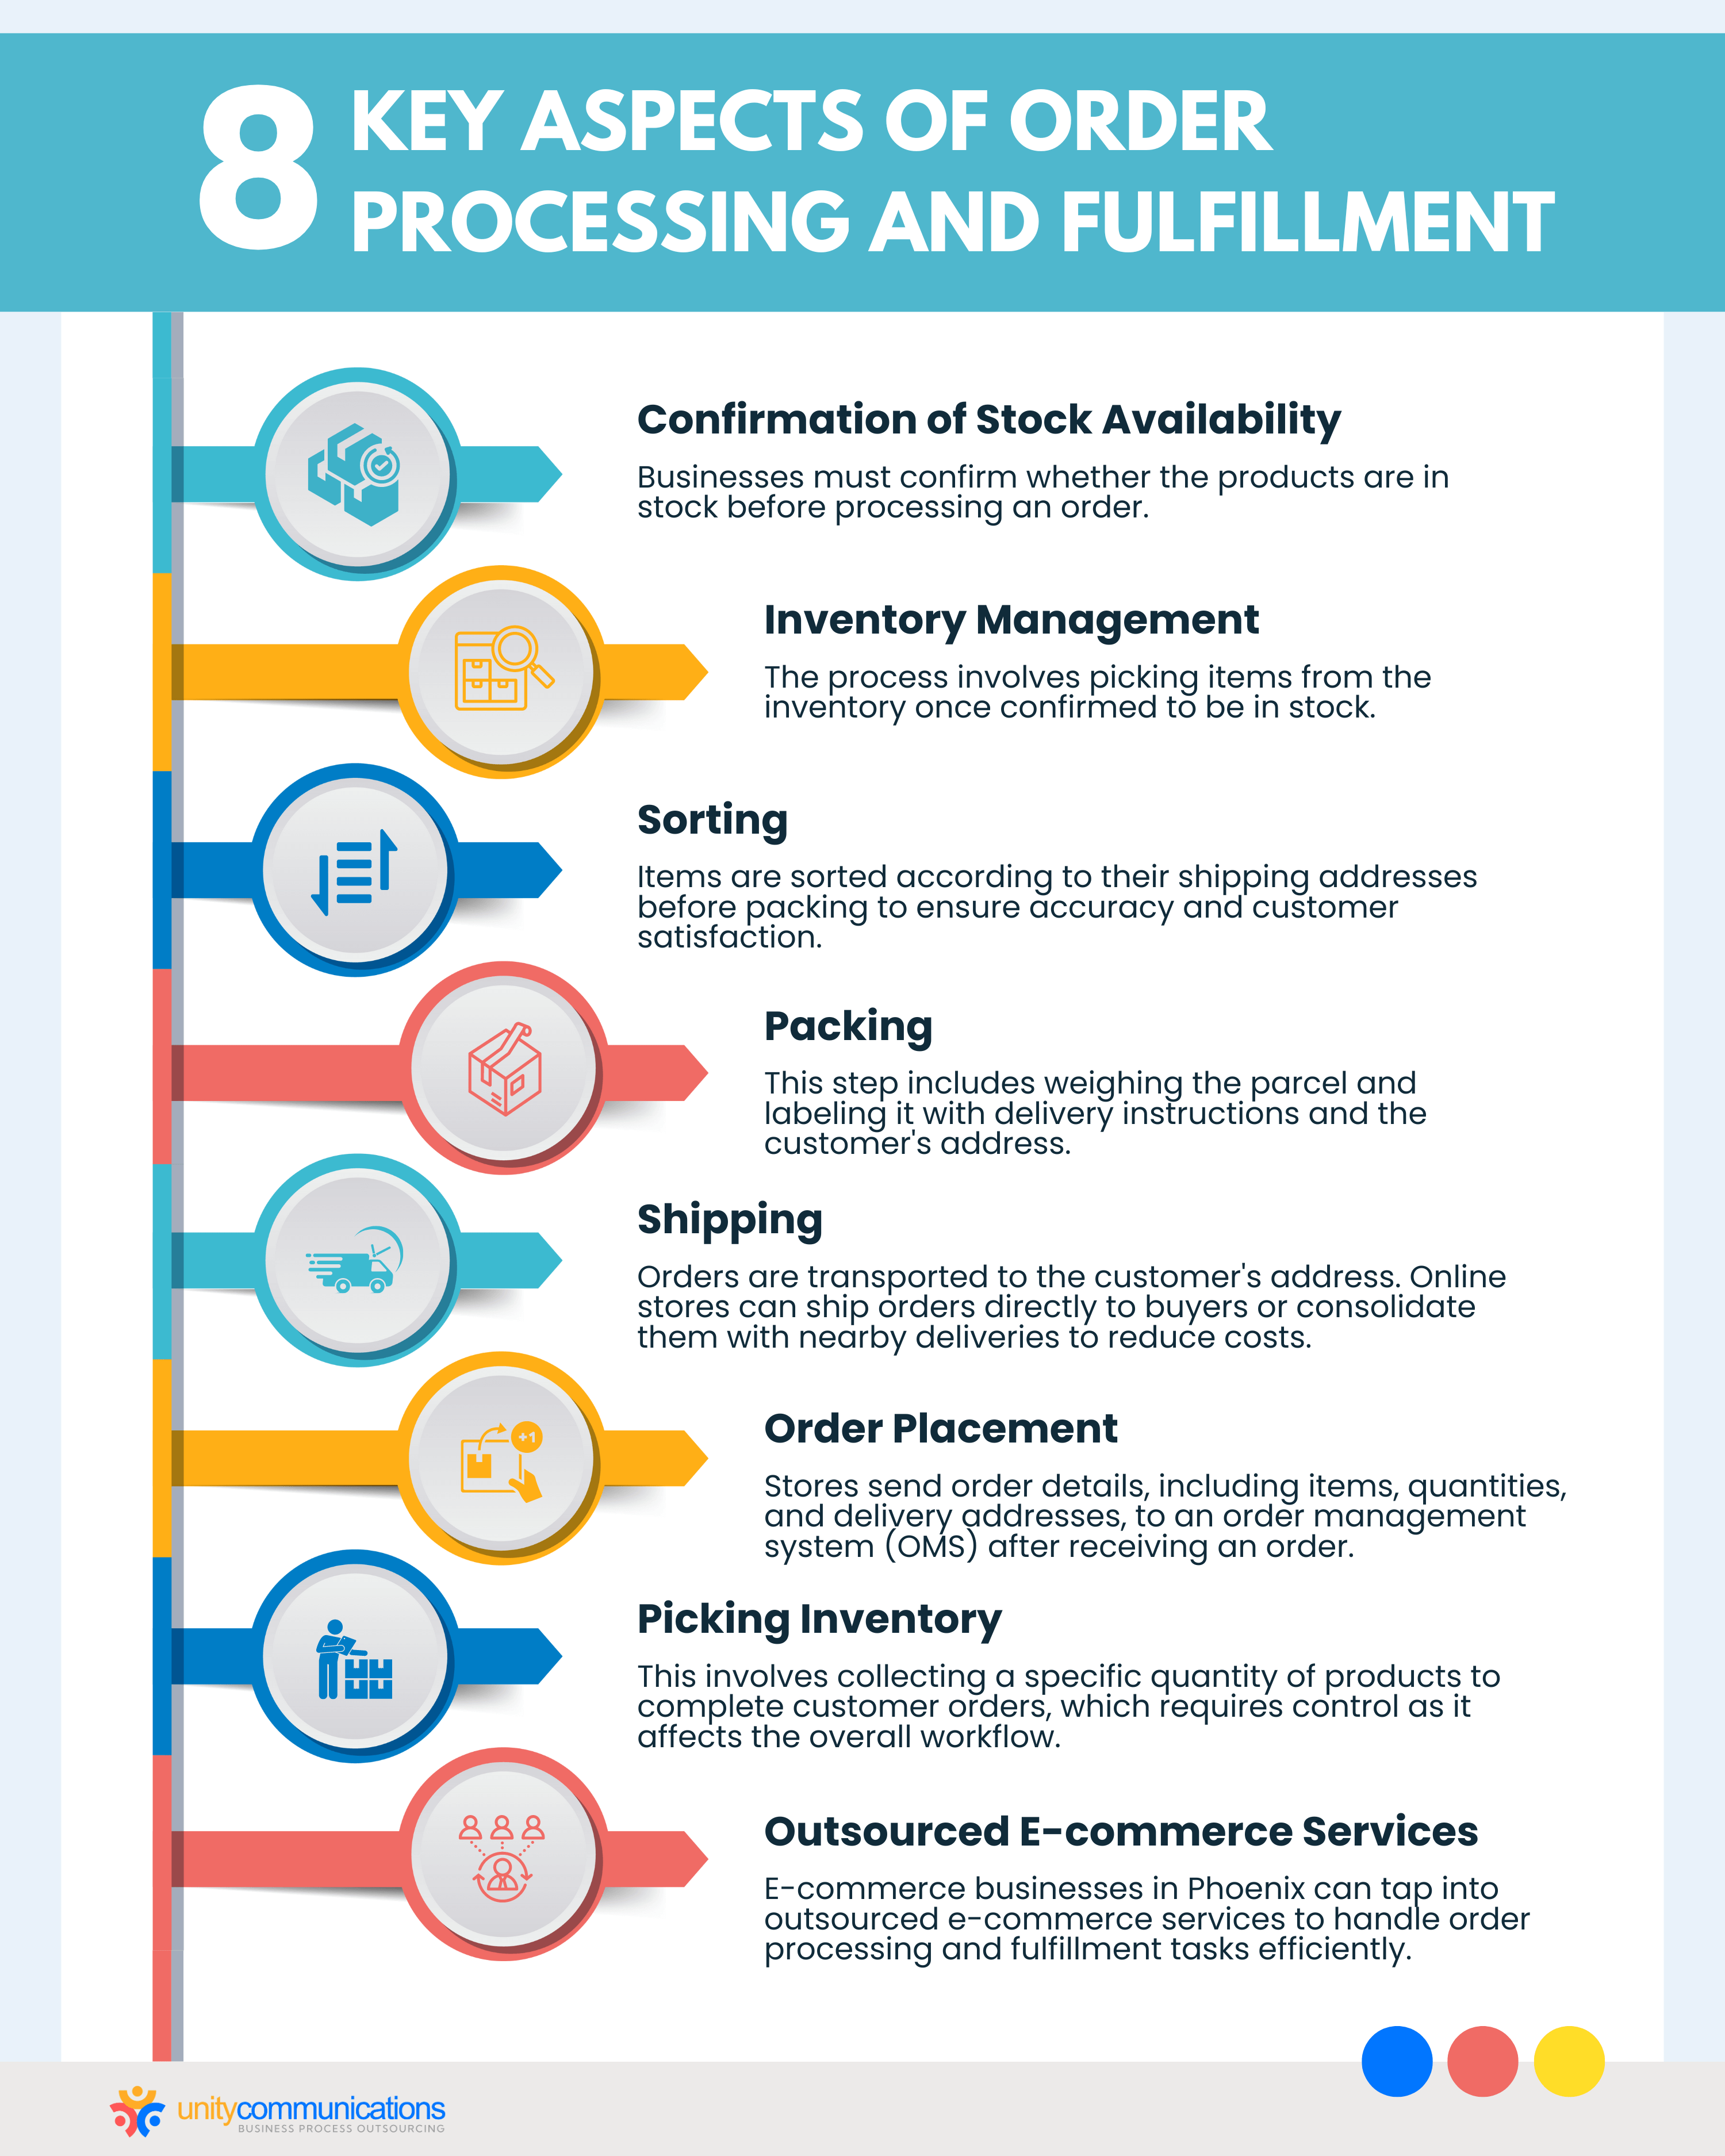 8 Key Aspects of Order Processing and Fulfillment